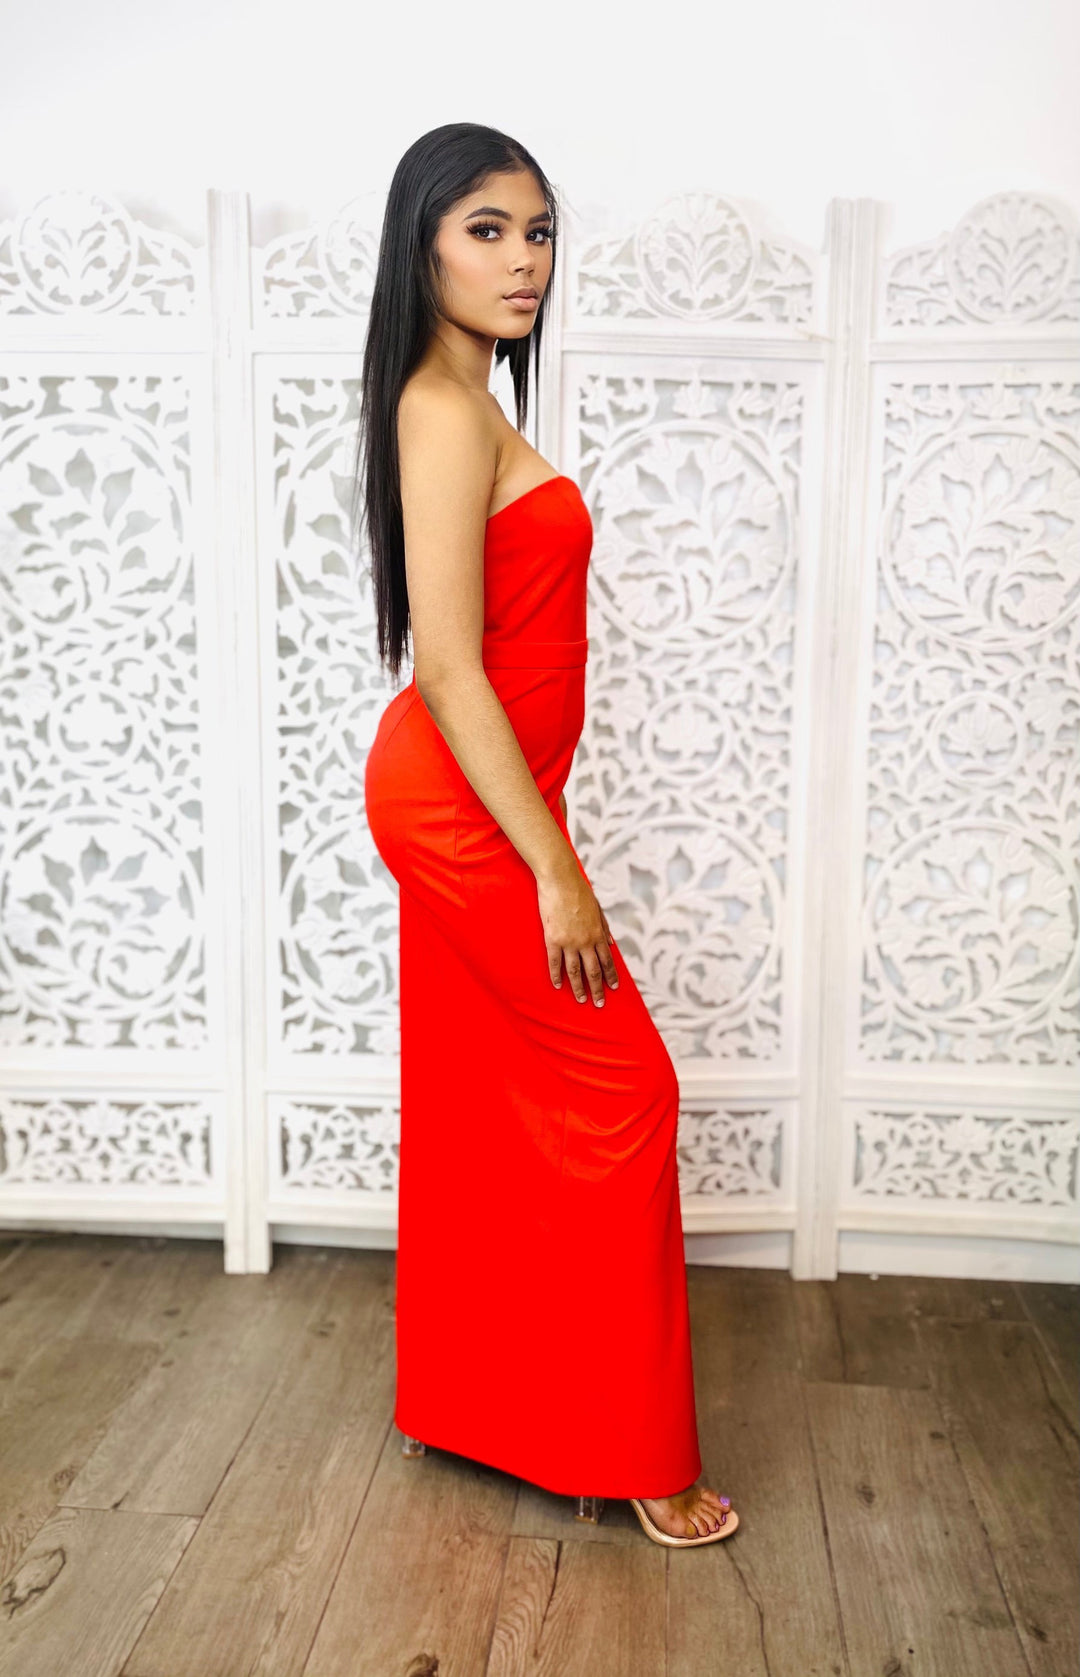 IRONS IN THE FIRE Fire Engine Red Long Dress-Long Dress-Malandra Boutique-Malandra Boutique, Women's Fashion Boutique Located in Las Vegas, NV